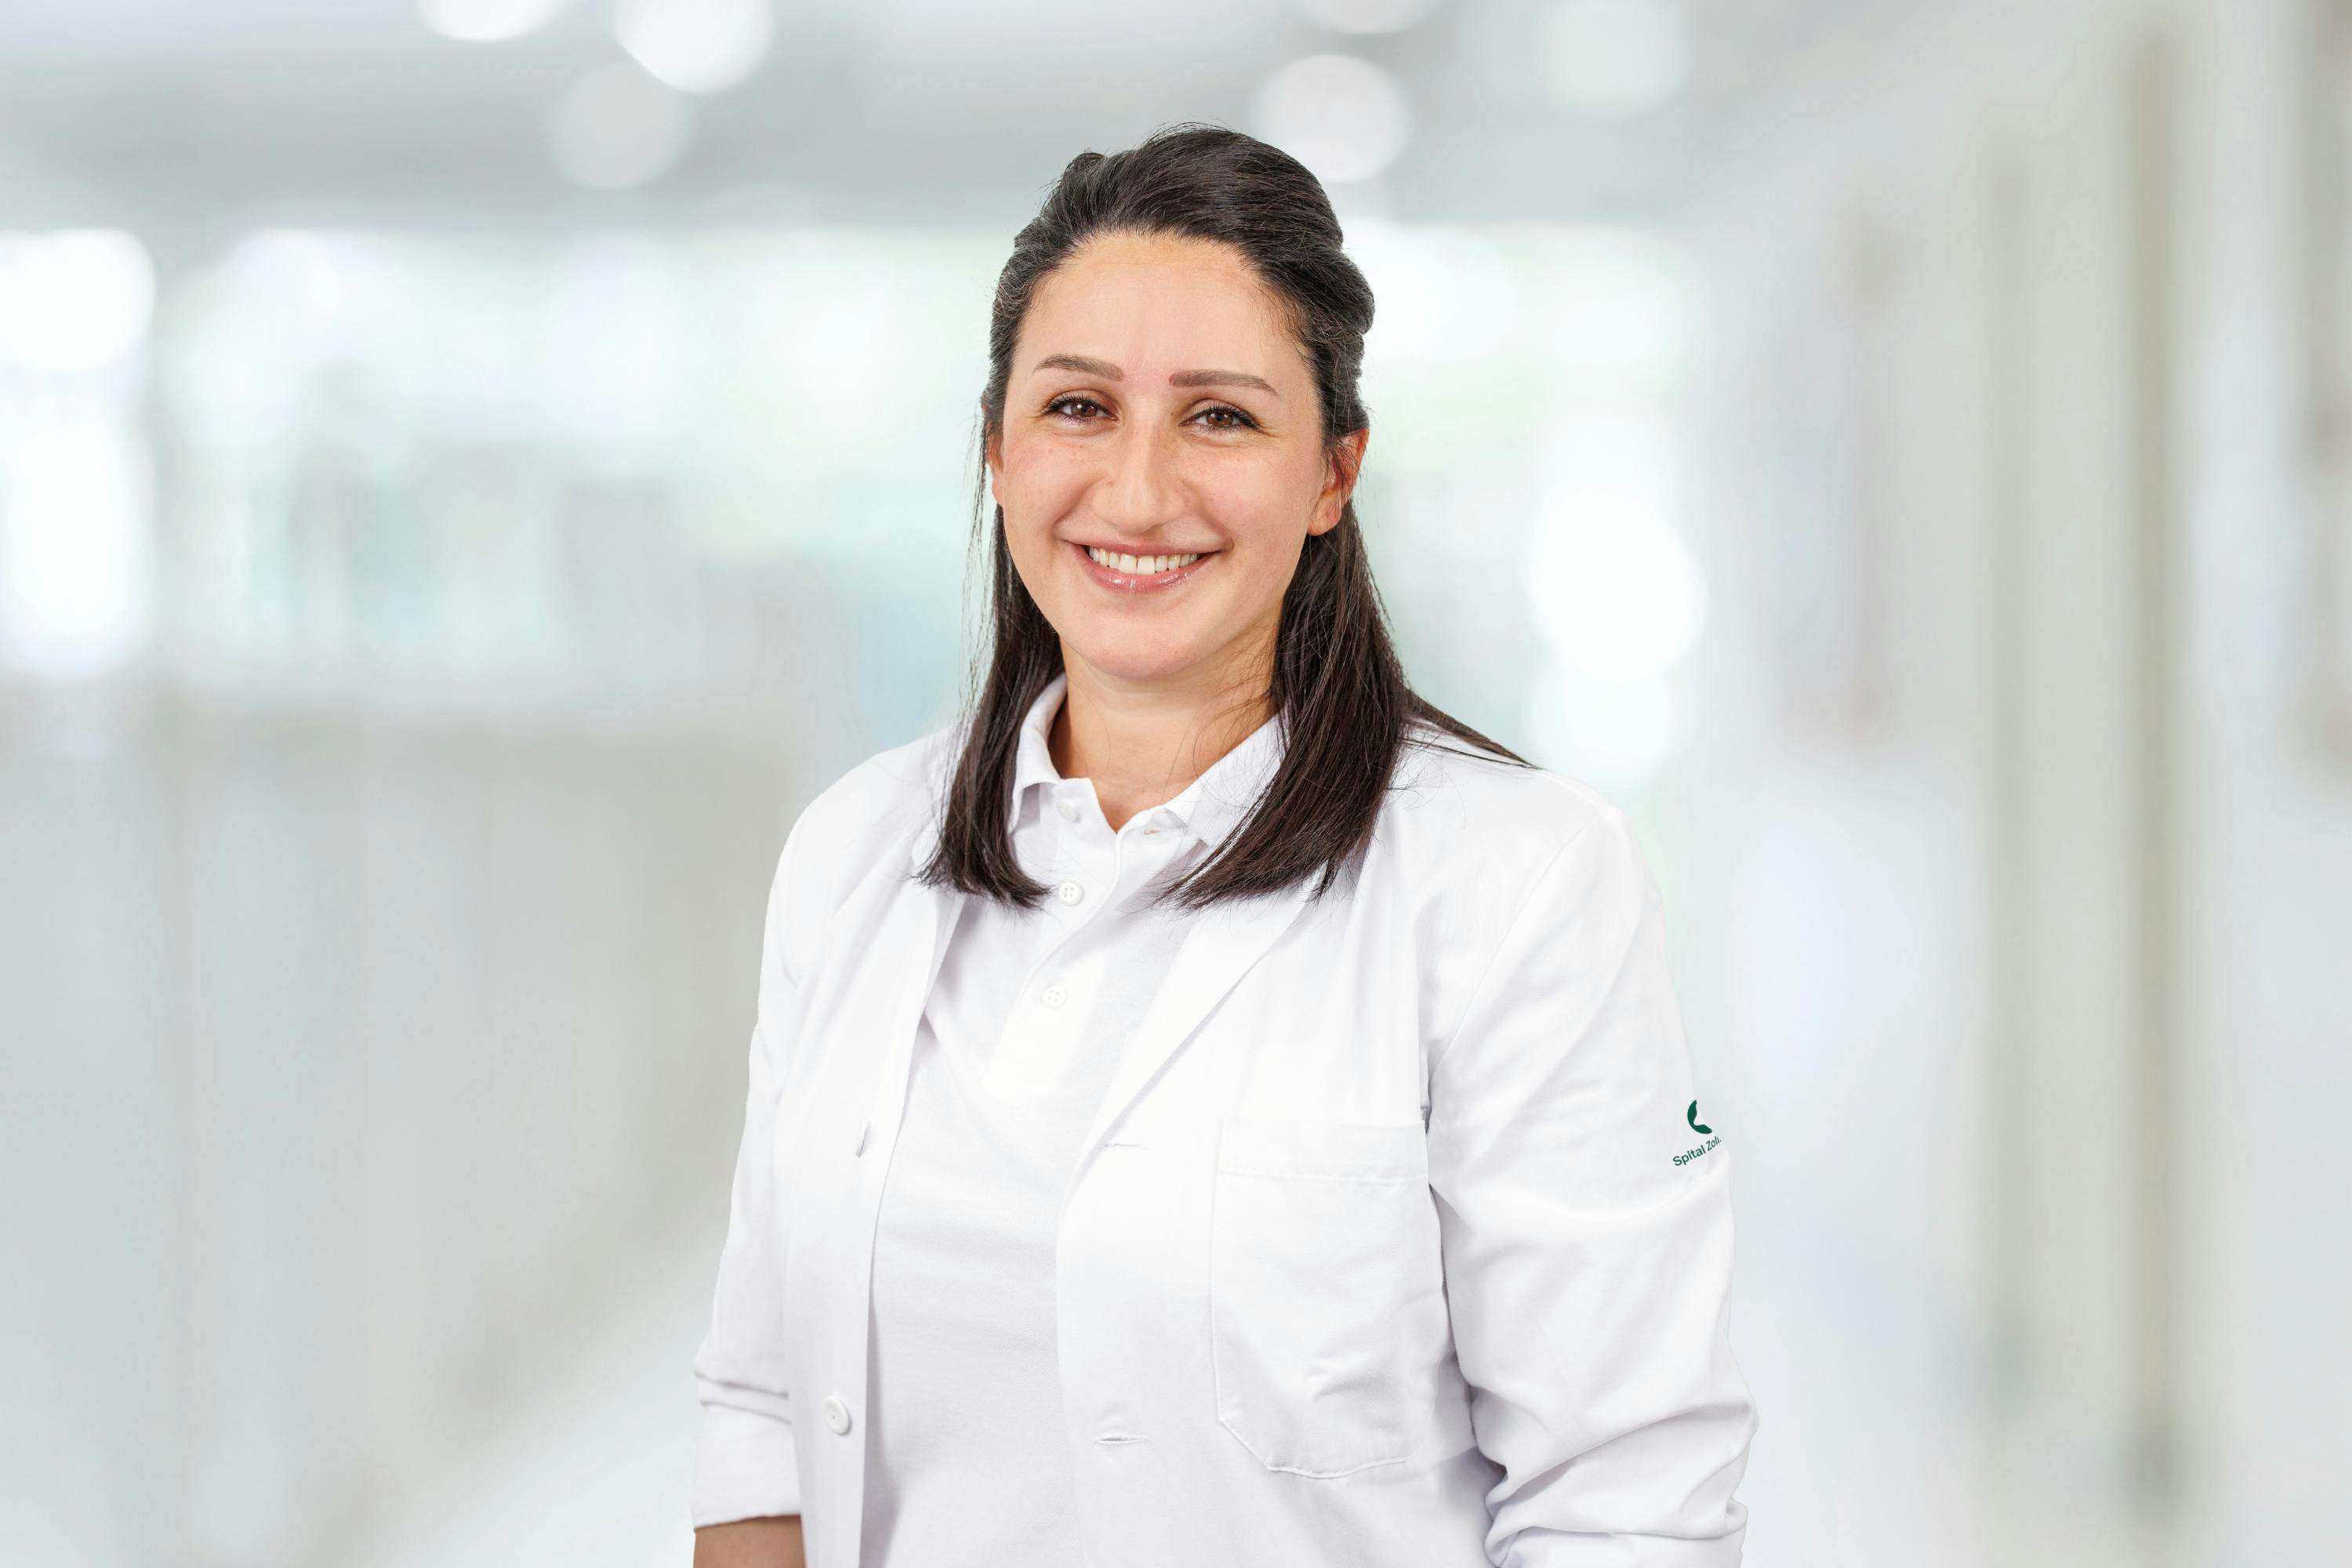 Smiling woman in a white doctor's coat in front of a blurred background.